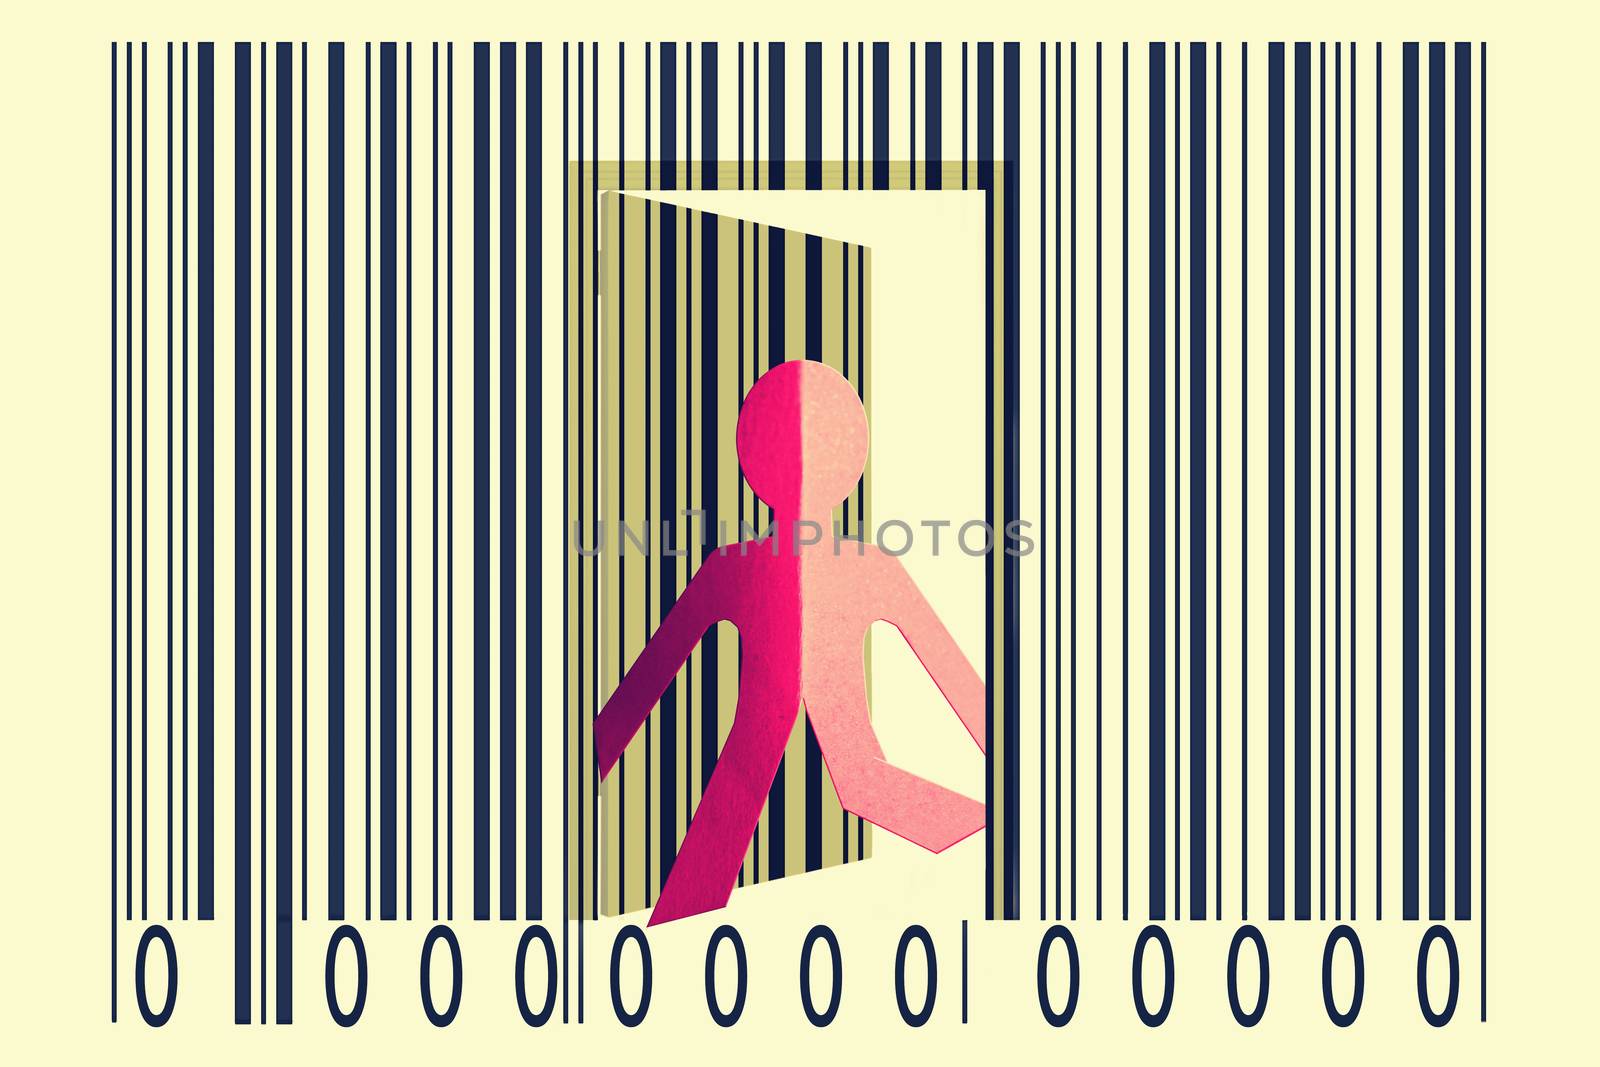 Paperman coming out of a bar code to go out by yands